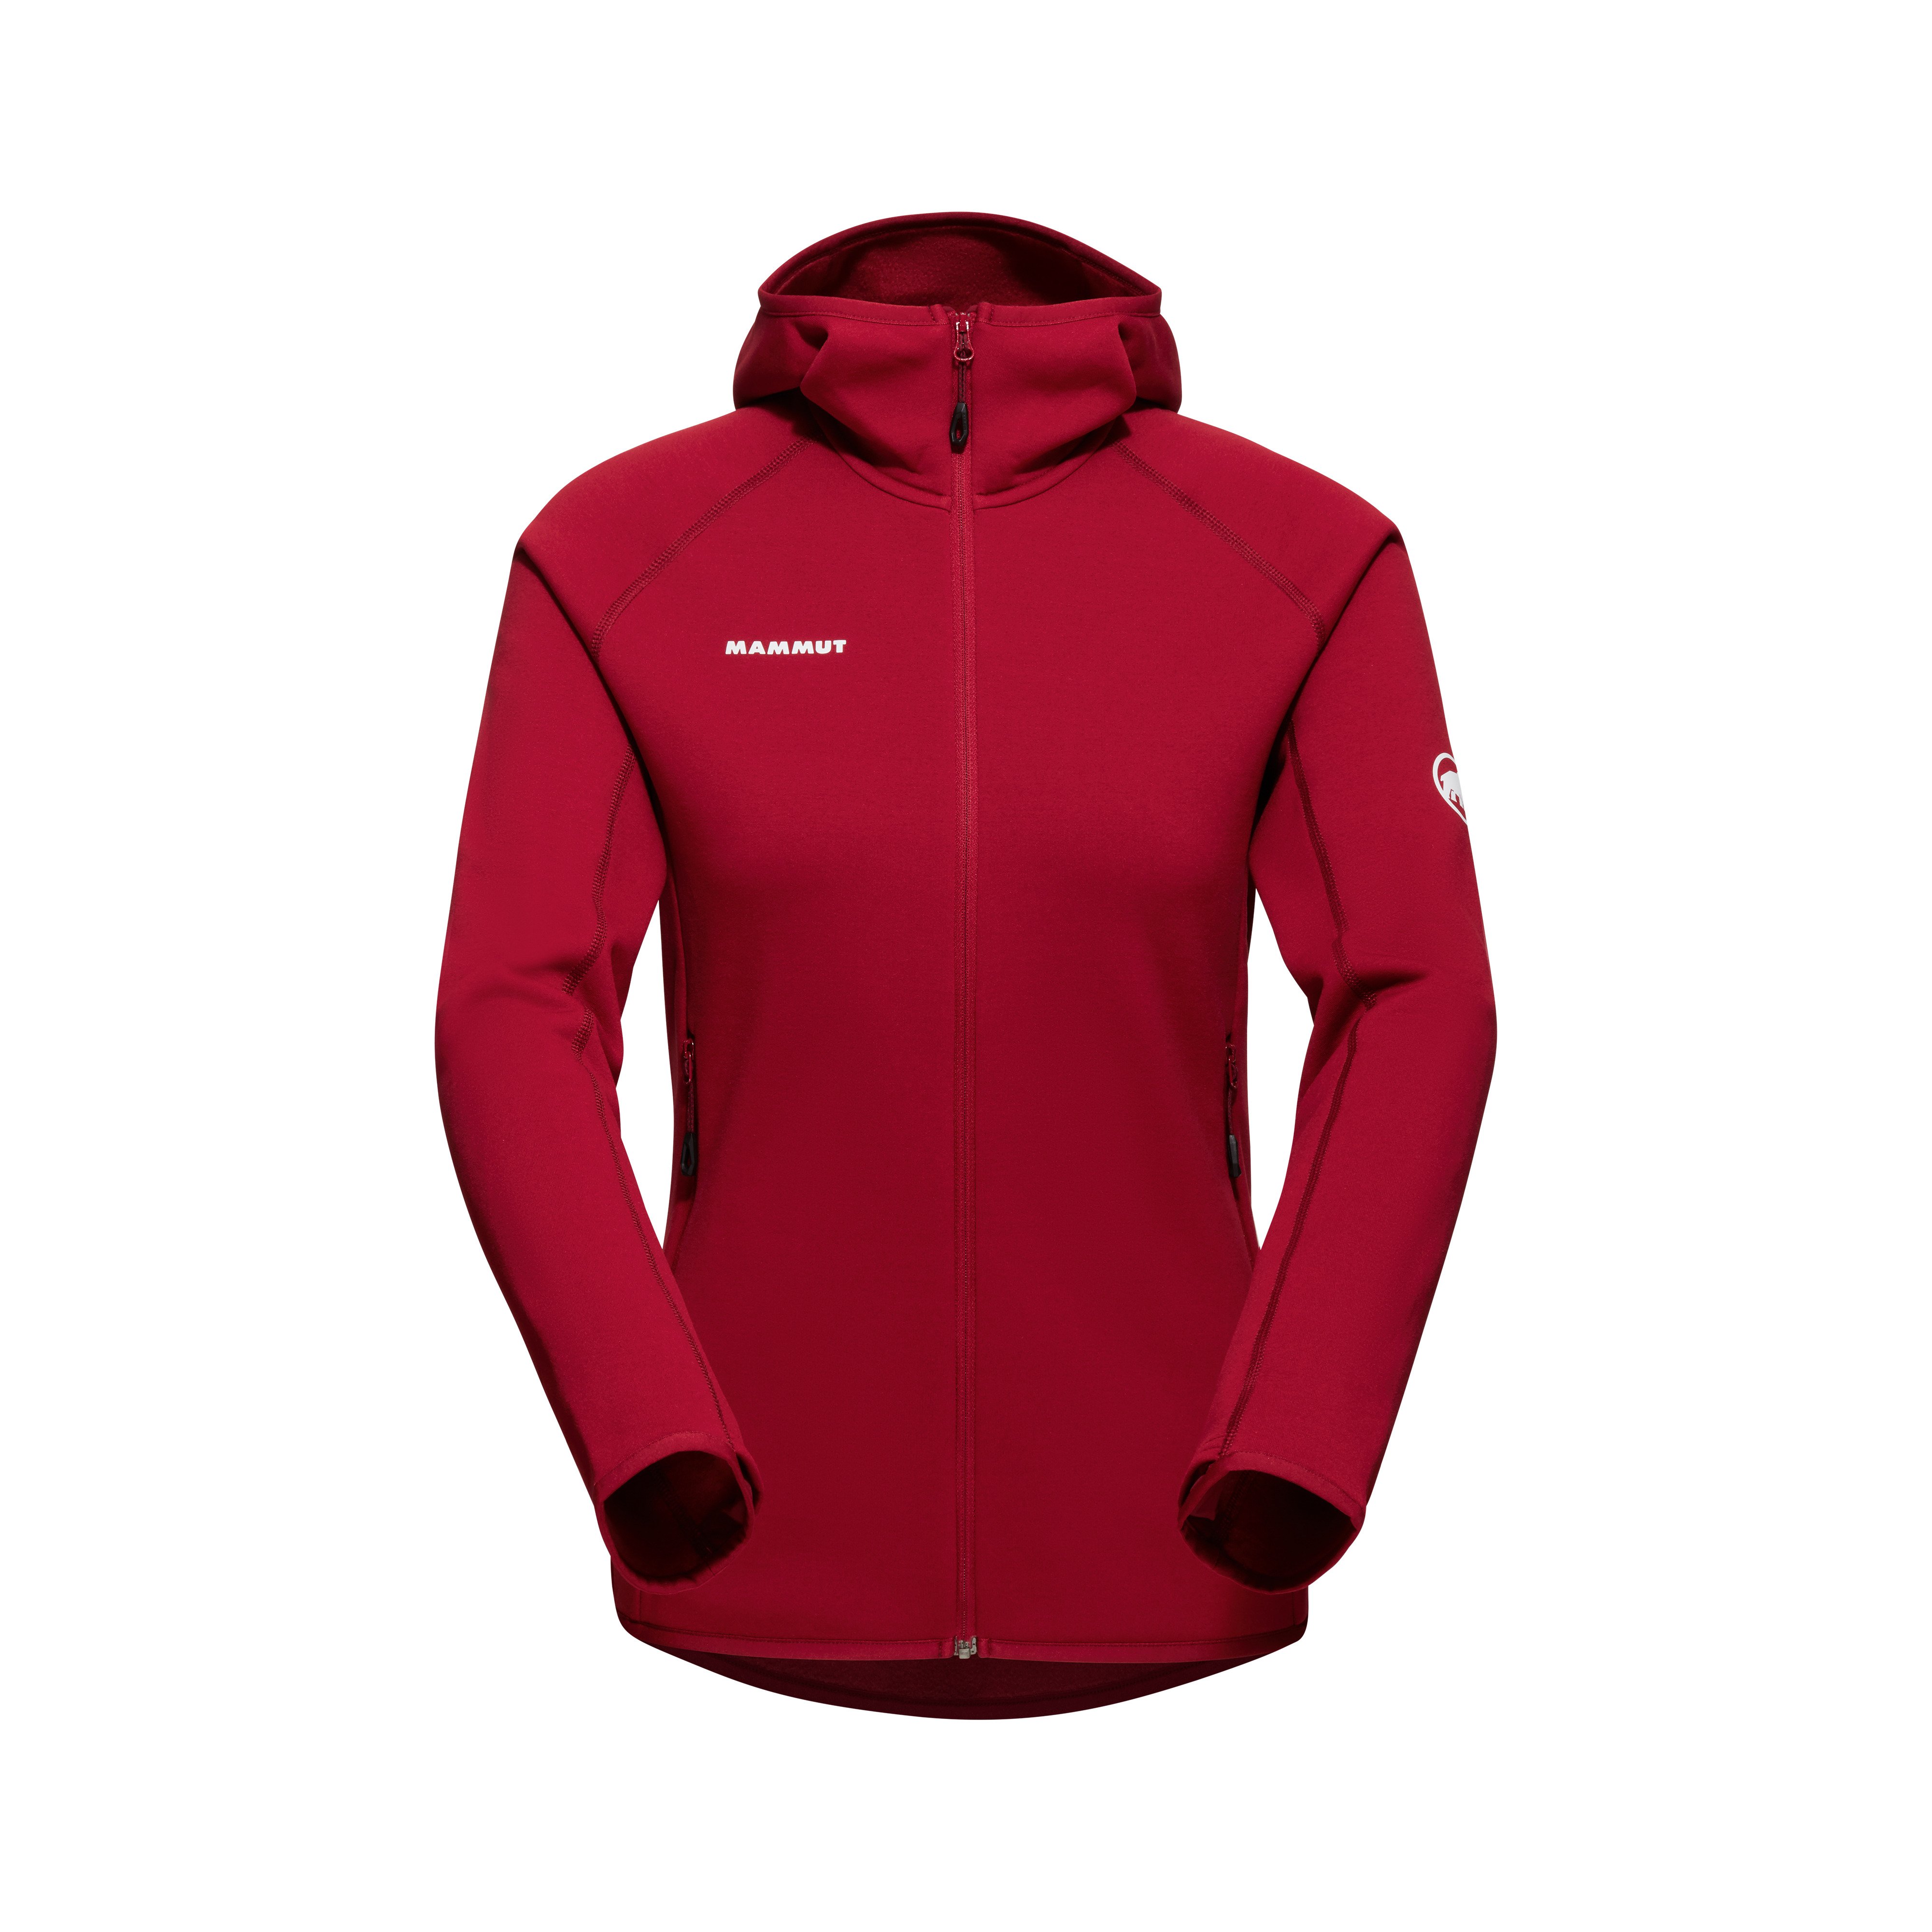 Aconcagua ML Hooded Jacket Women - blood red, M product image